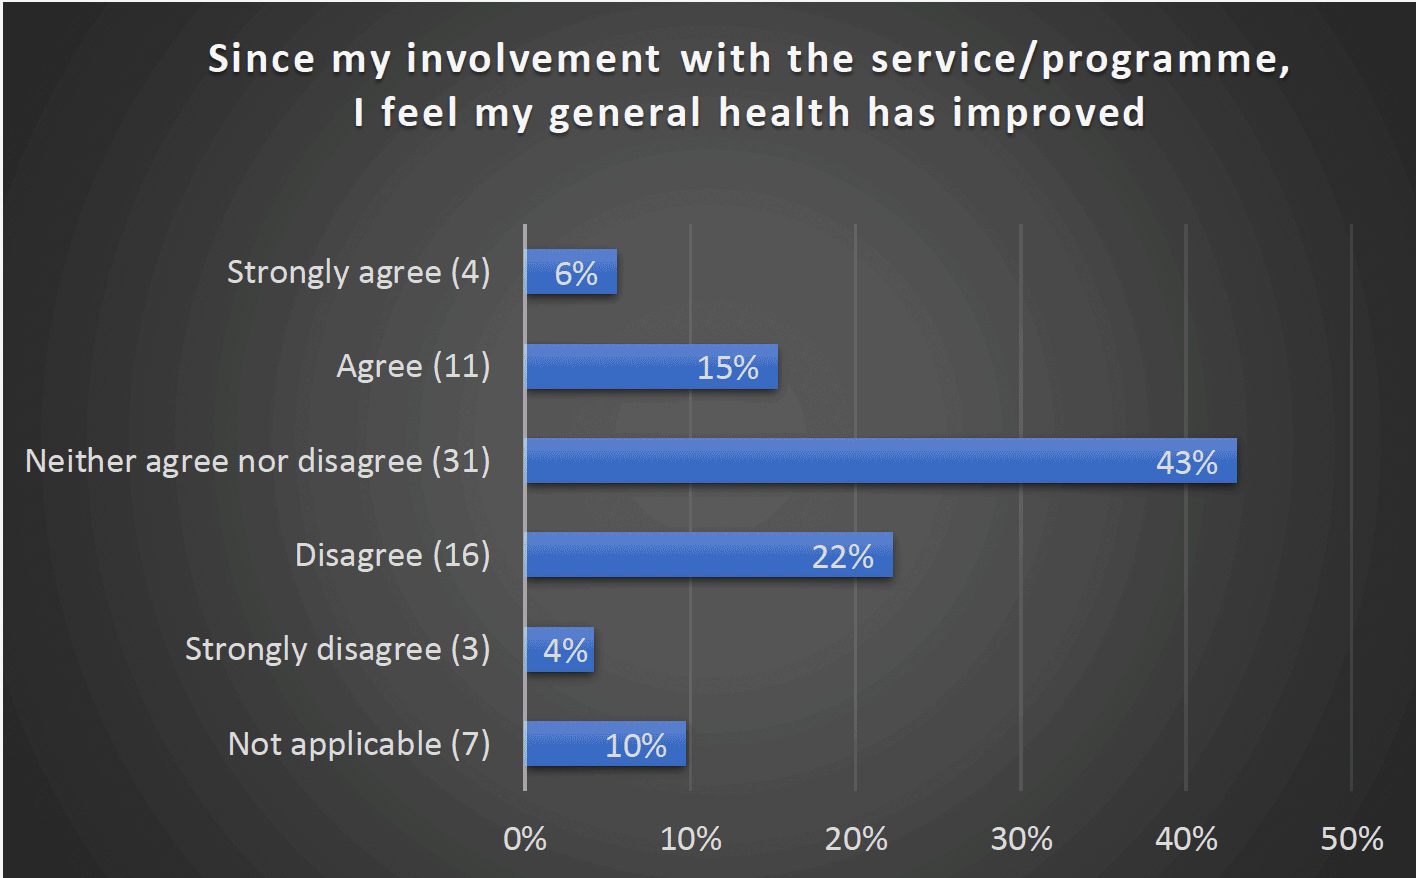 Since my involvement with the service/programme, I feel my general health has improved - Strongly agree (4) 6%, Agree (11) 15%, Neither agree nor disagree (31) 43%, Disagree (16) 22%, Strongly disagree (3) 4%, Not applicable (7) 10%